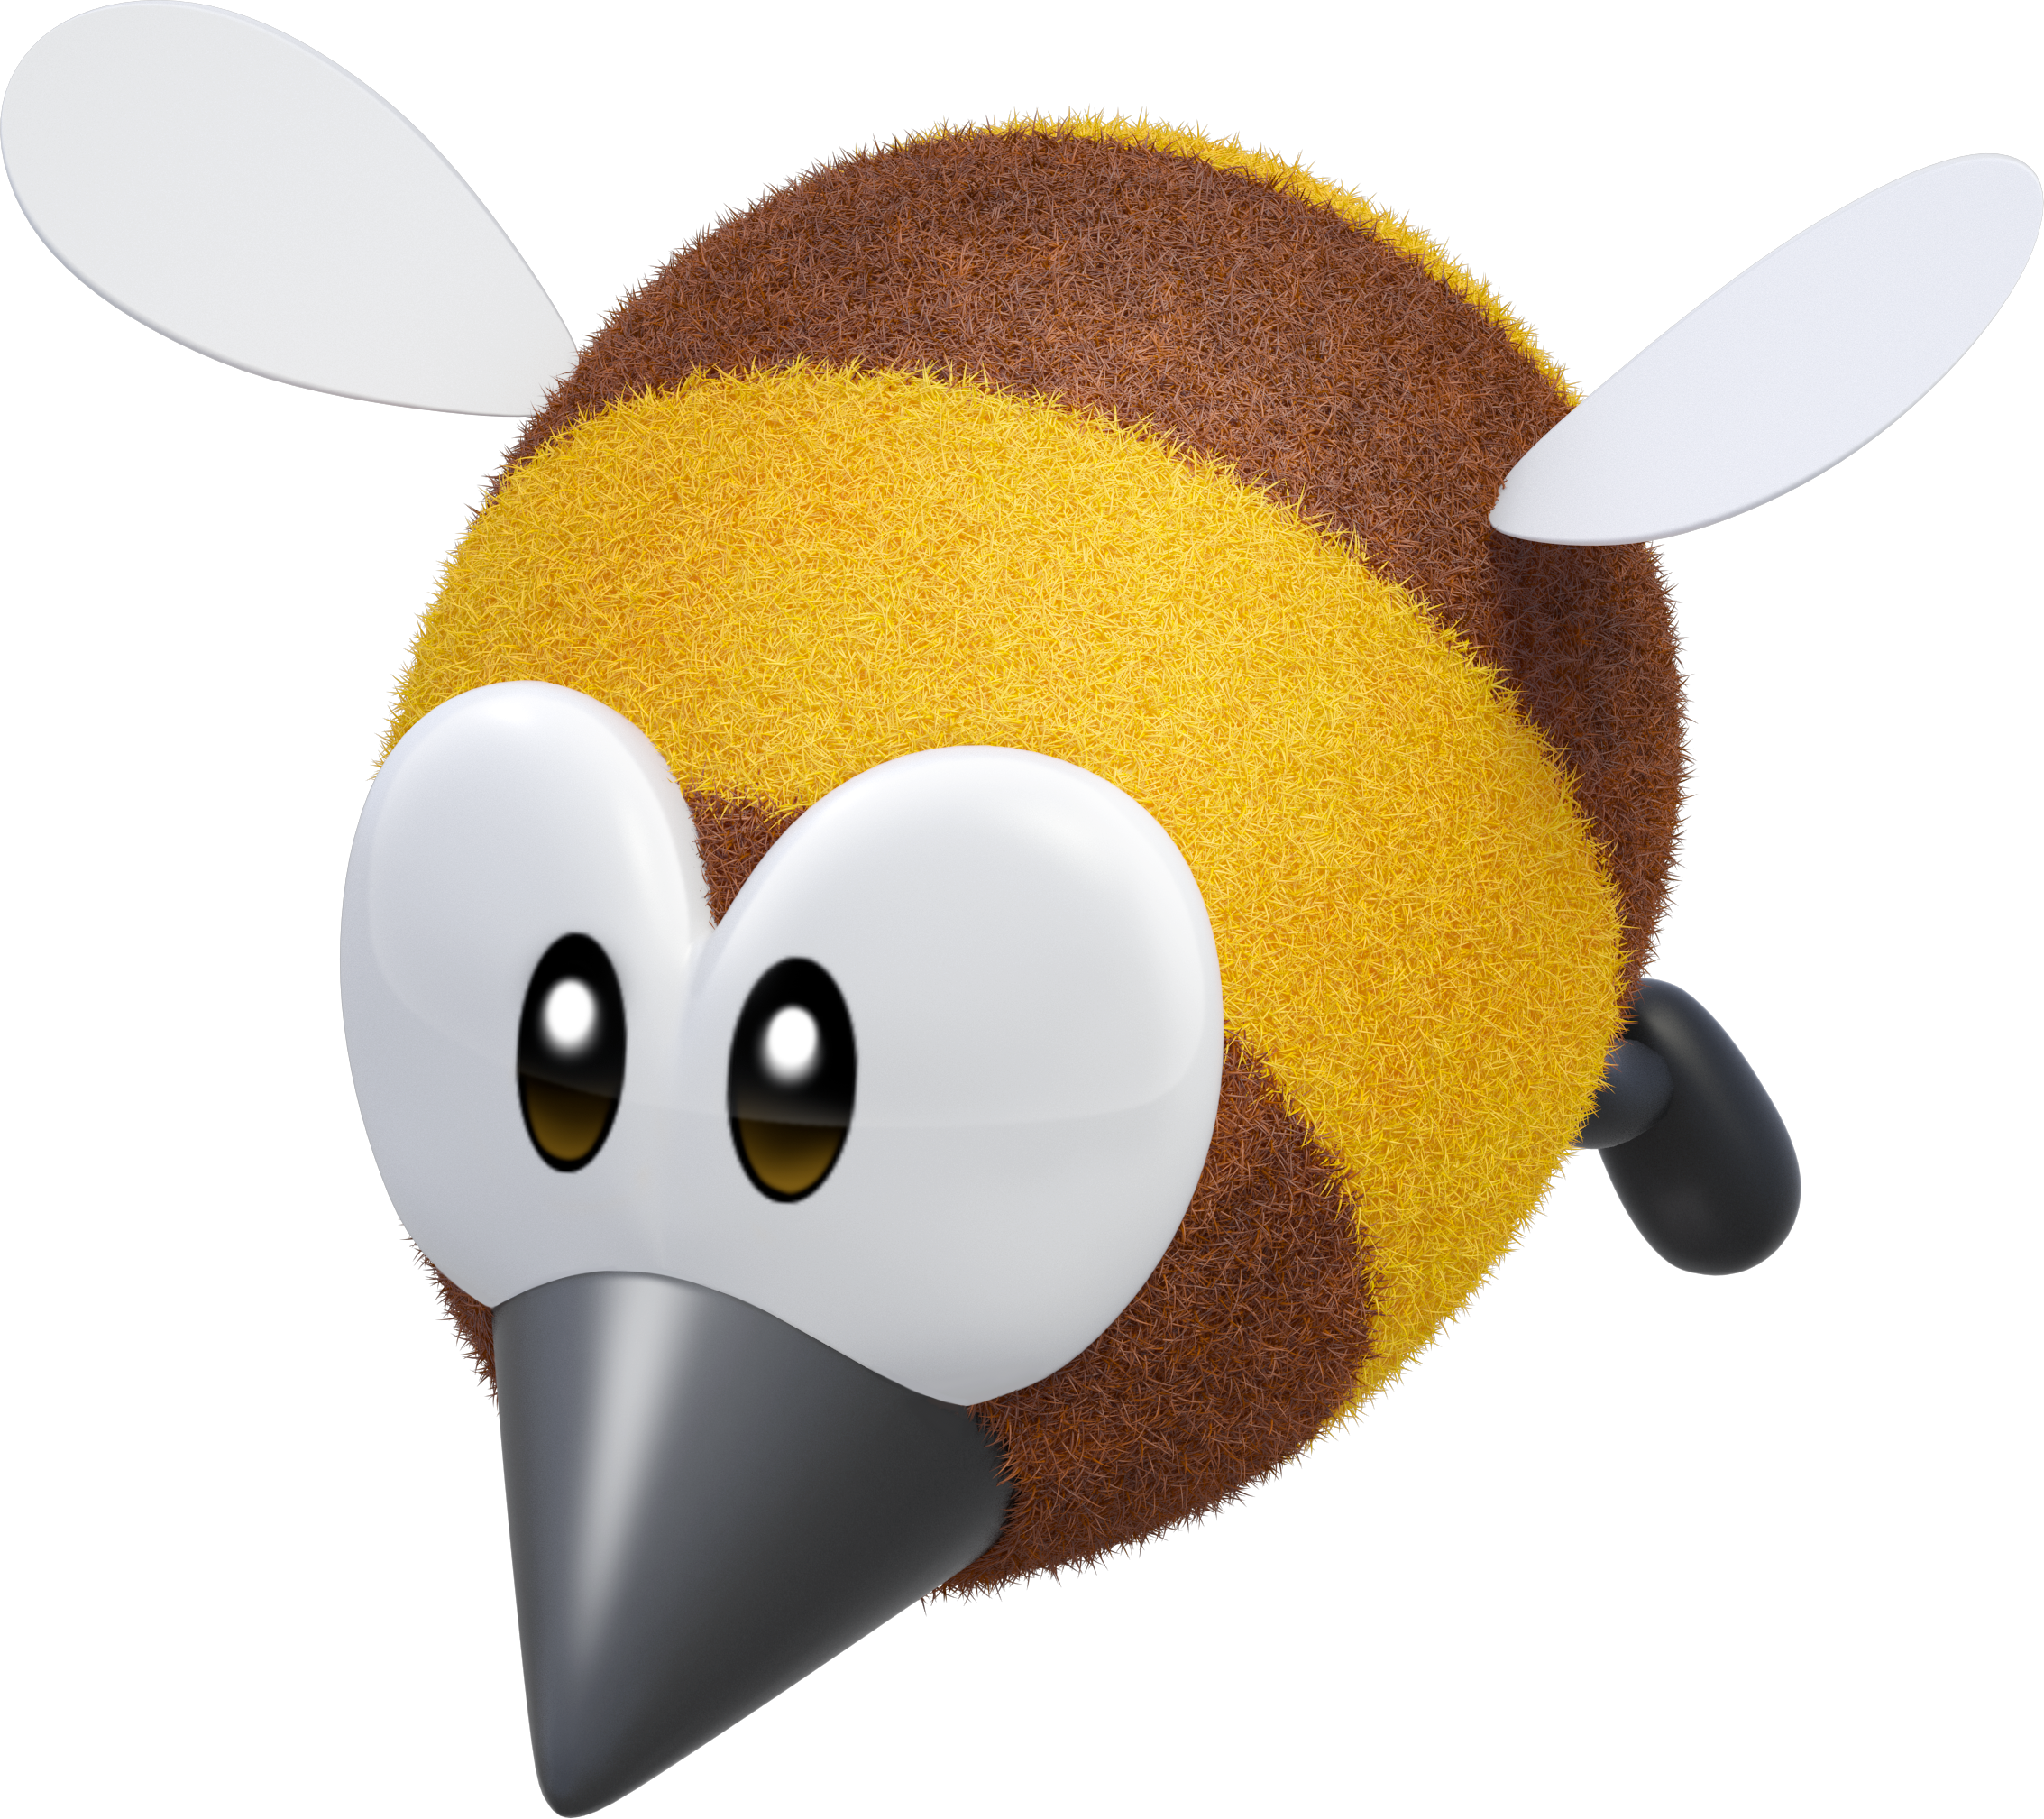 Artwork of a Stingby from Super Mario 3D World.